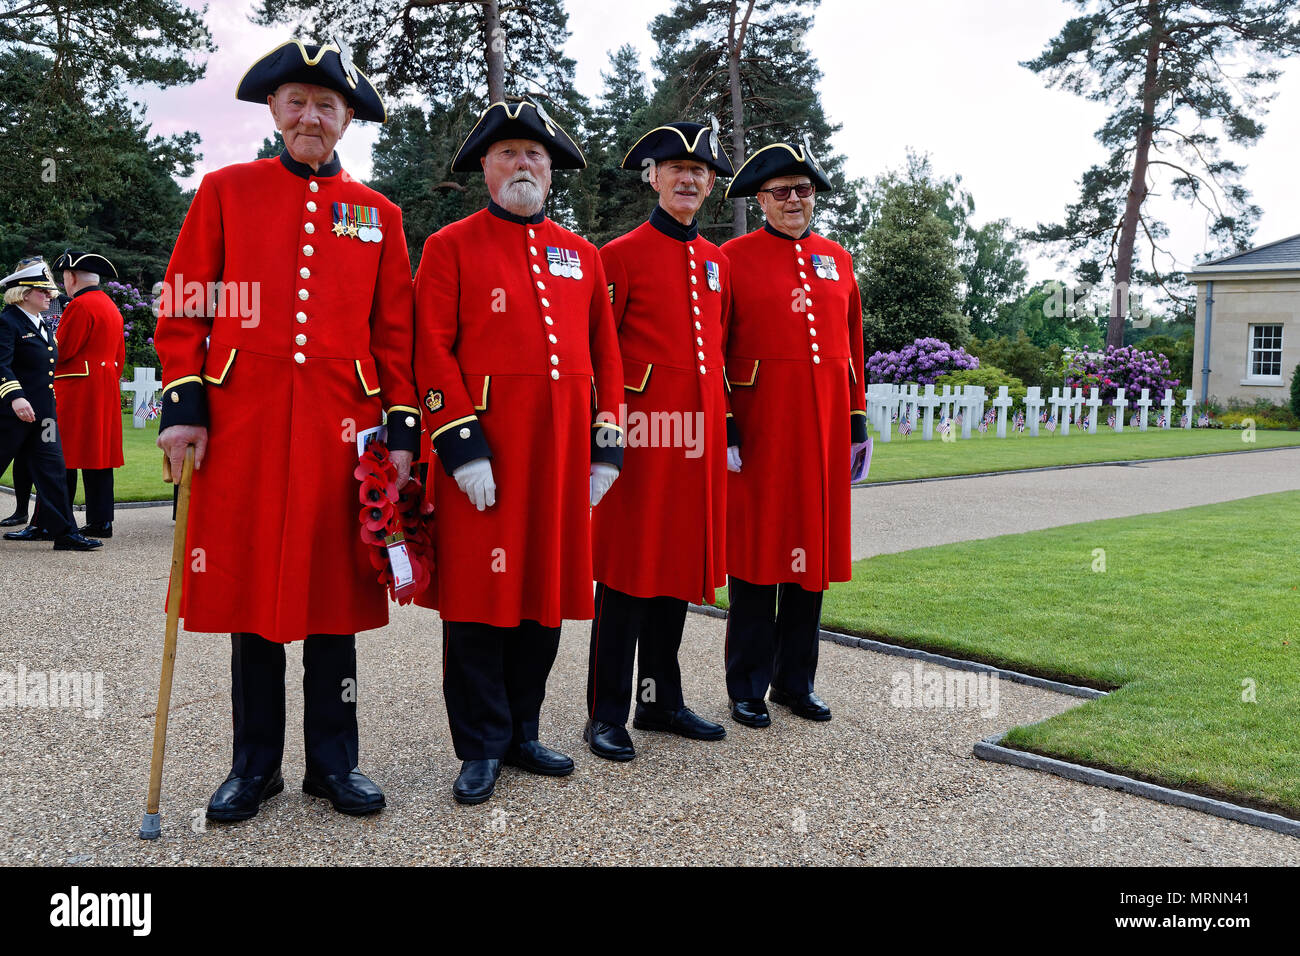 Brookwood American Military Cemetery, Surrey, UKBrookwood American Military Cemetery, Surrey, UK. Sun 27th May 2018 Brookwood American Cemetery, Surrey UK. Chelsea Pensioners attend the ceremony. Credit: wyrdlight/Alamy Live News Stock Photo